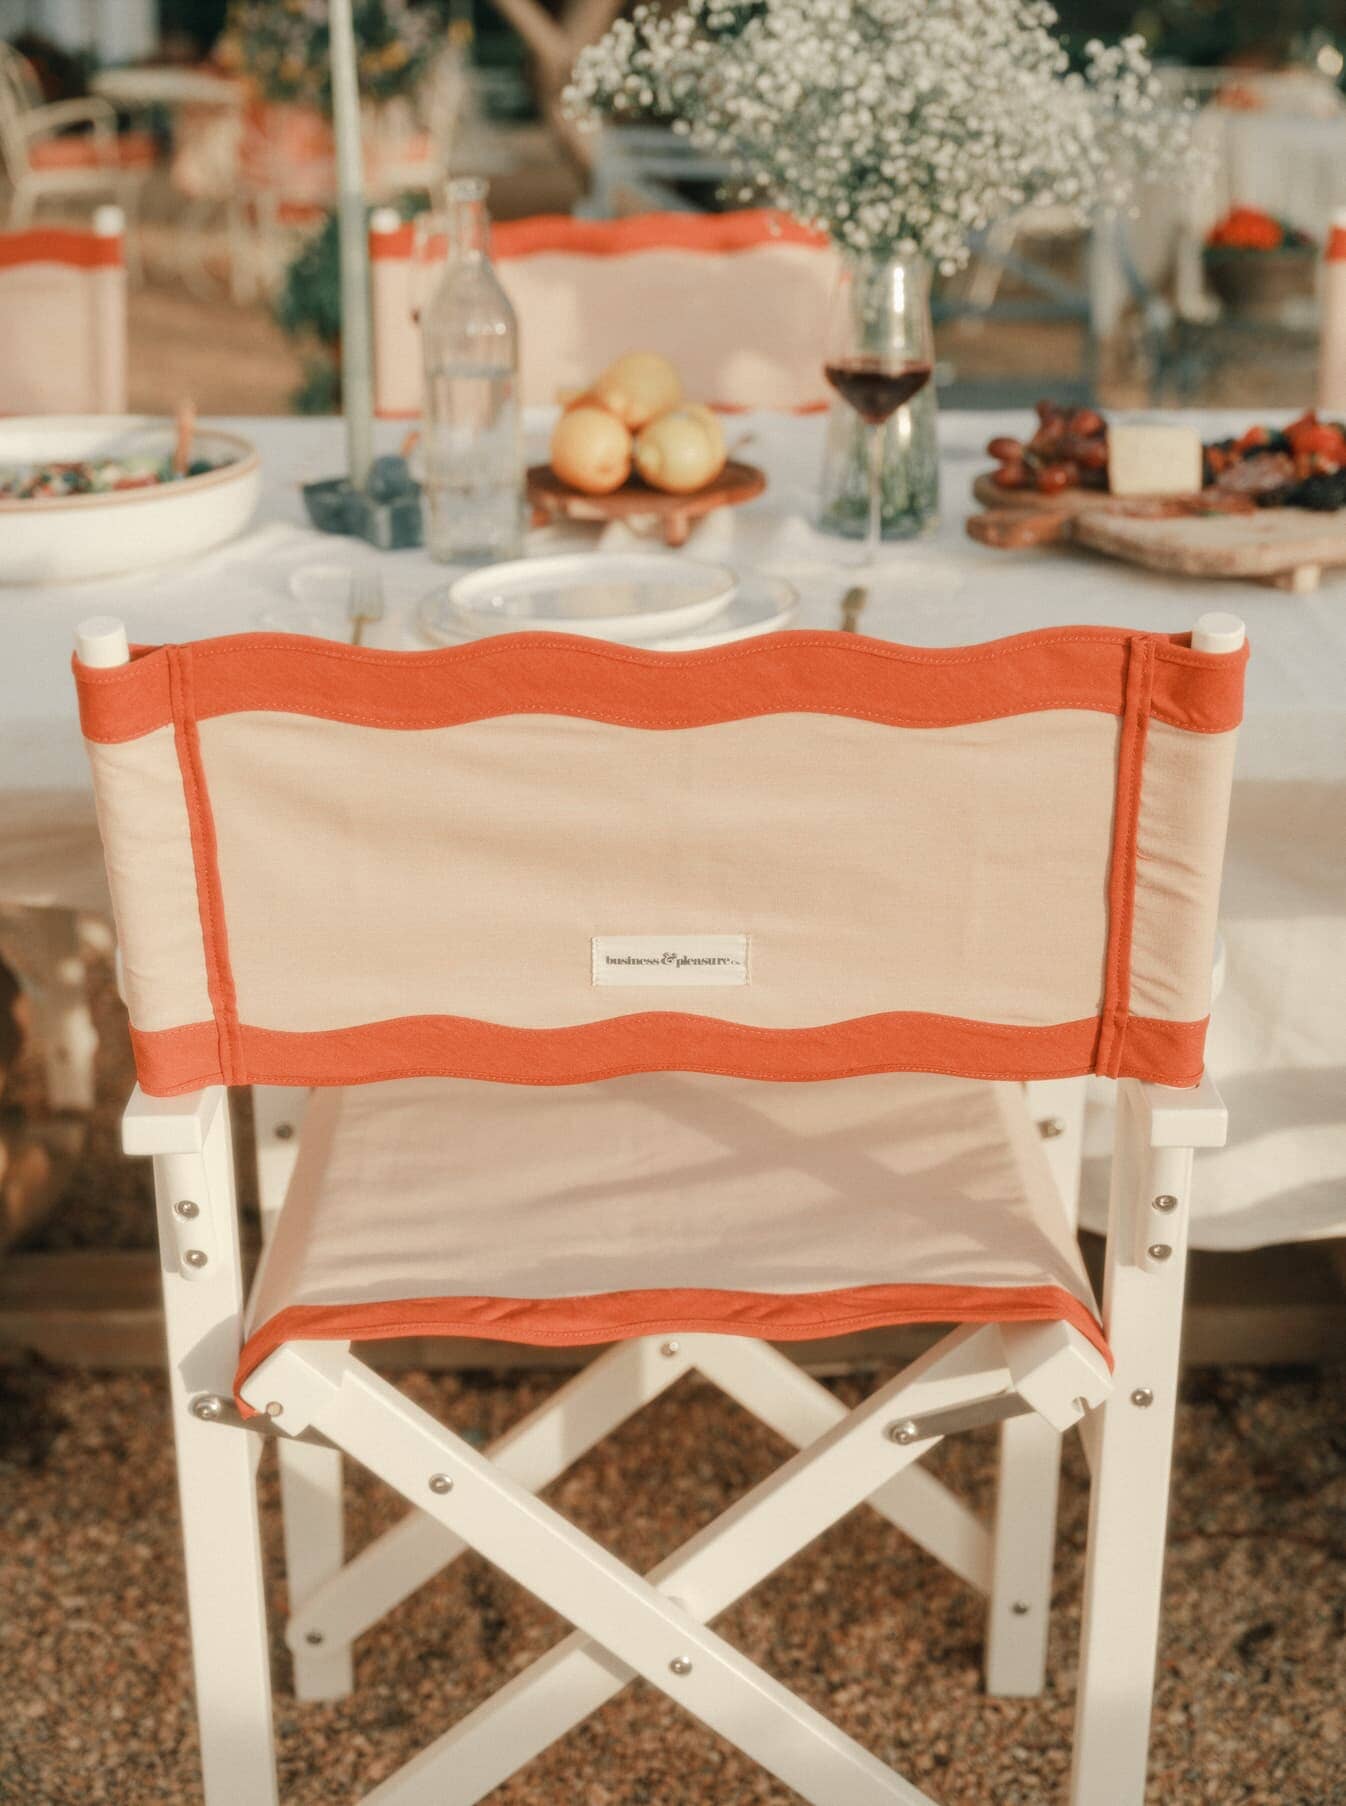 Riviera pink directors chair at an outdoor table